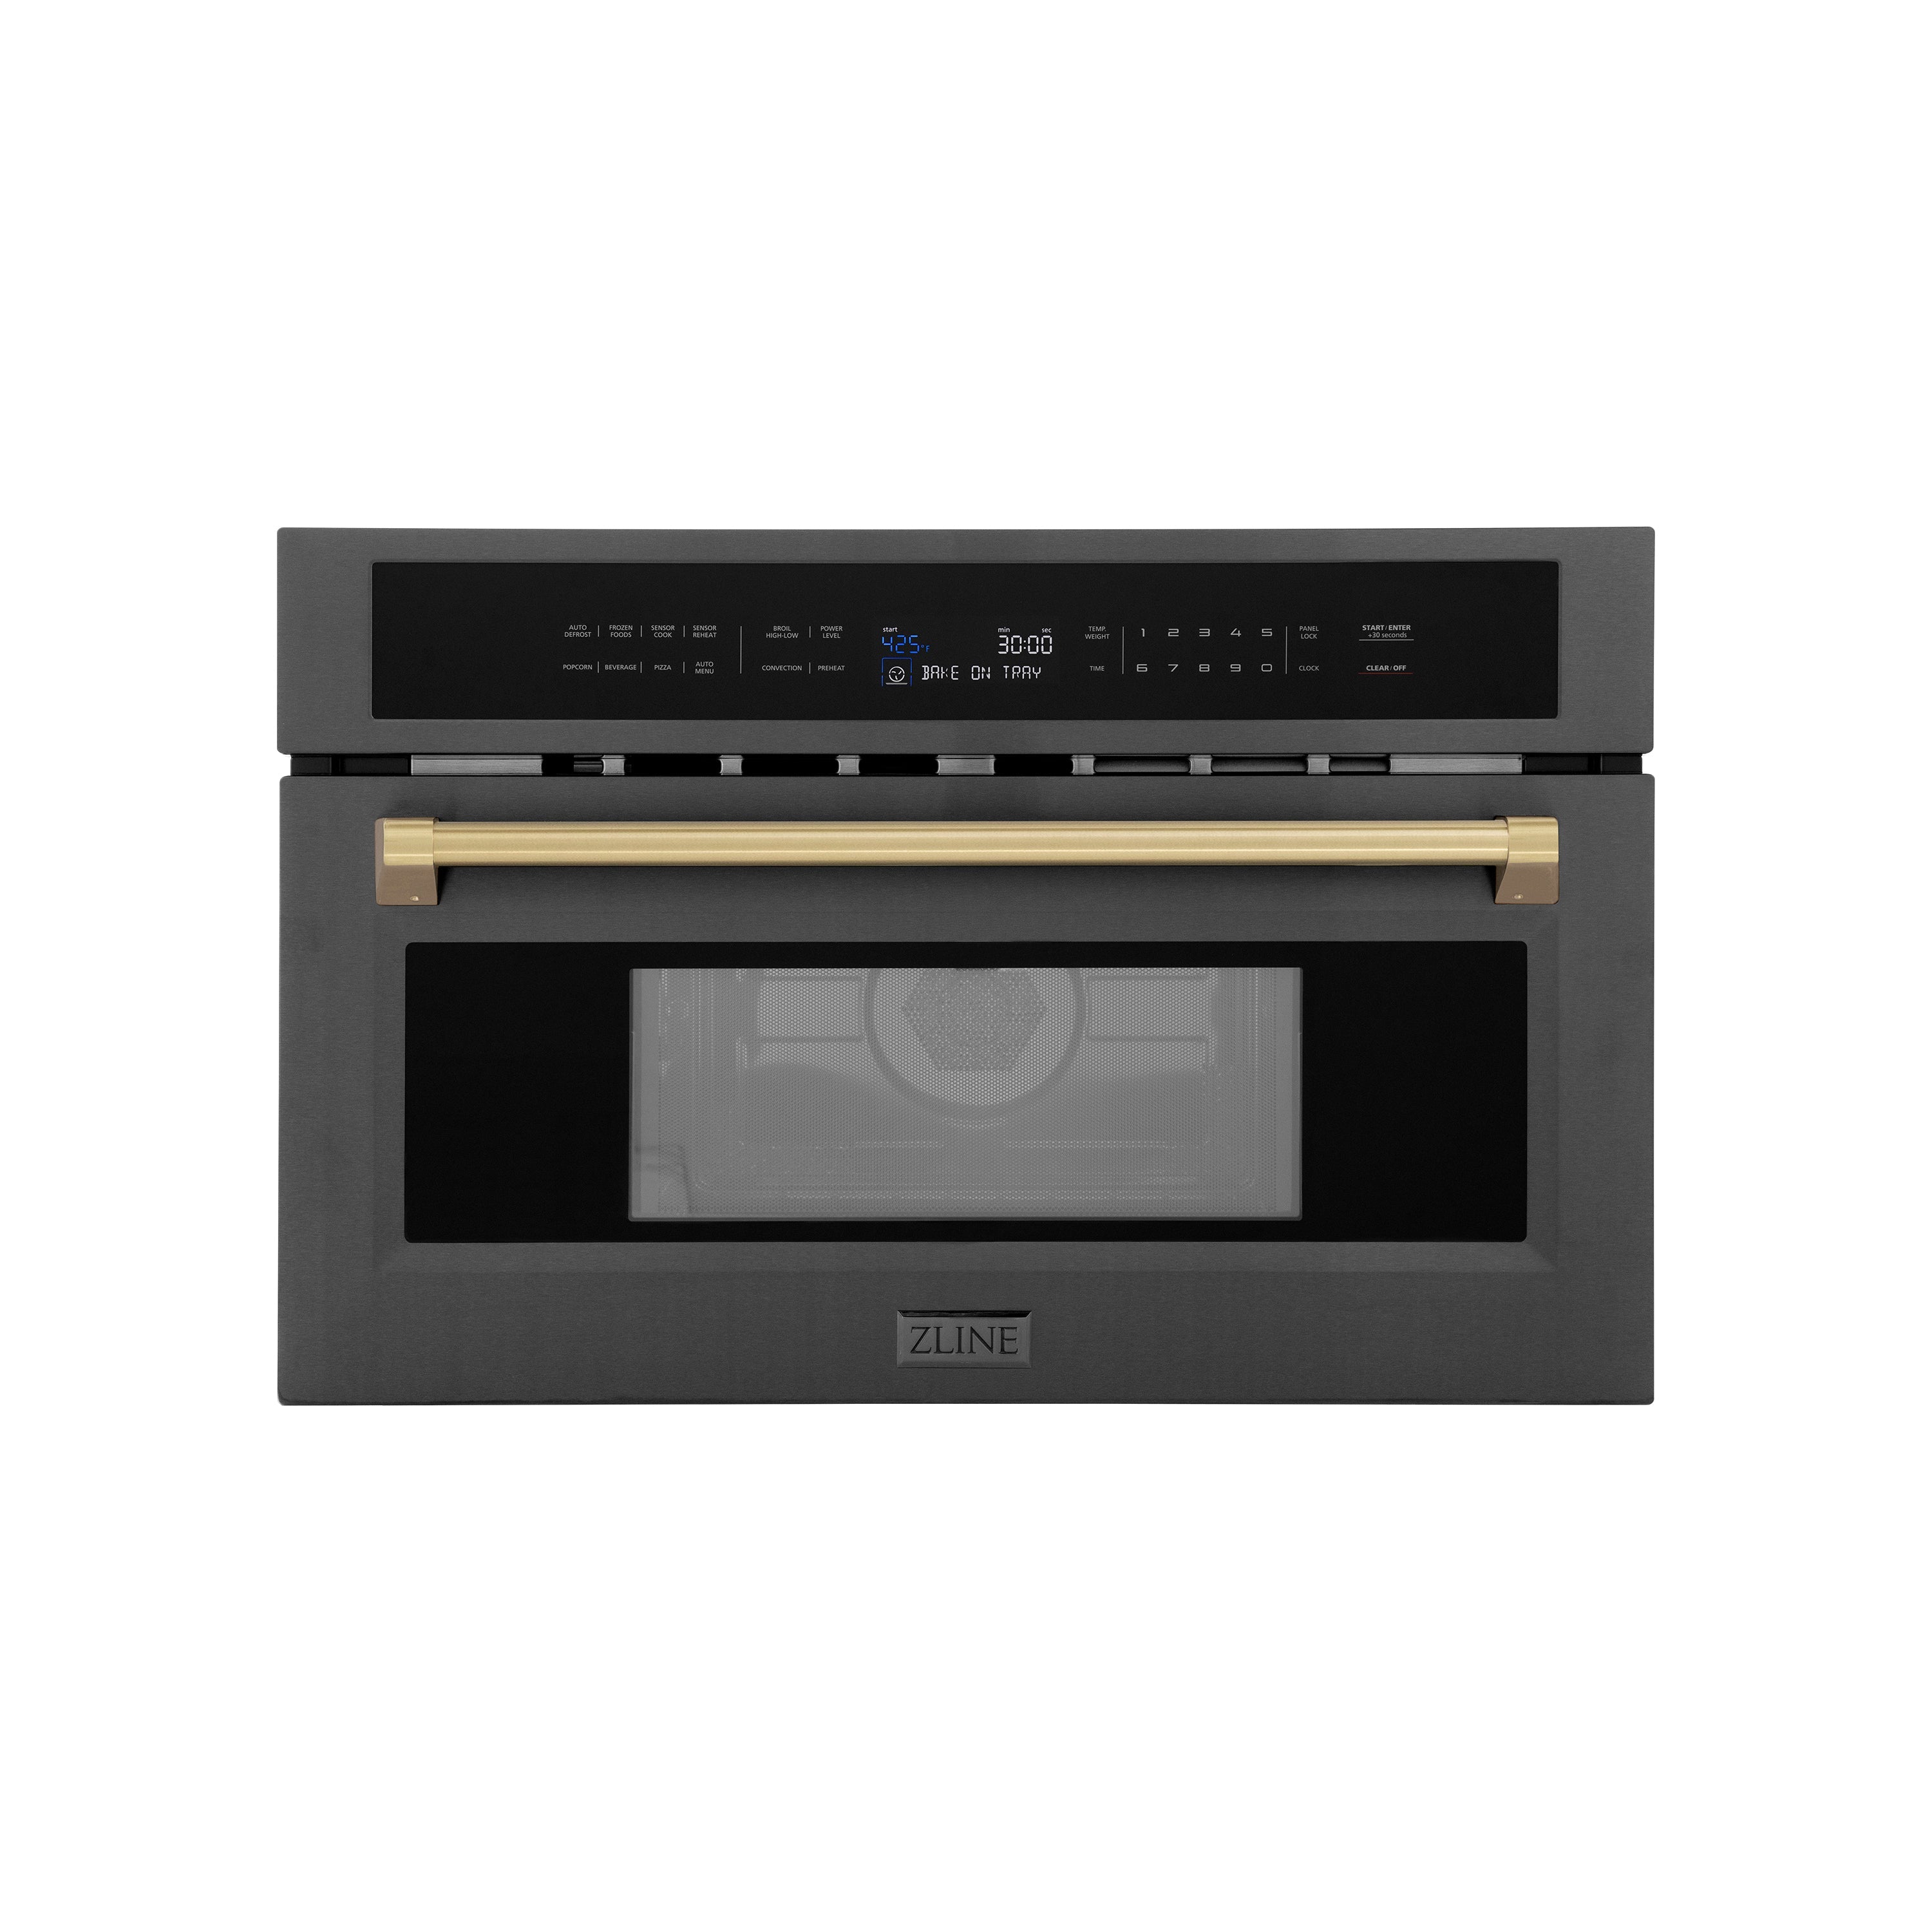 ZLINE Autograph Edition 30 in. 1.6 cu ft. Built-in Convection Microwave Oven in Black Stainless Steel with Champagne Bronze Accents (MWOZ-30-BS-CB) Front View Door Closed